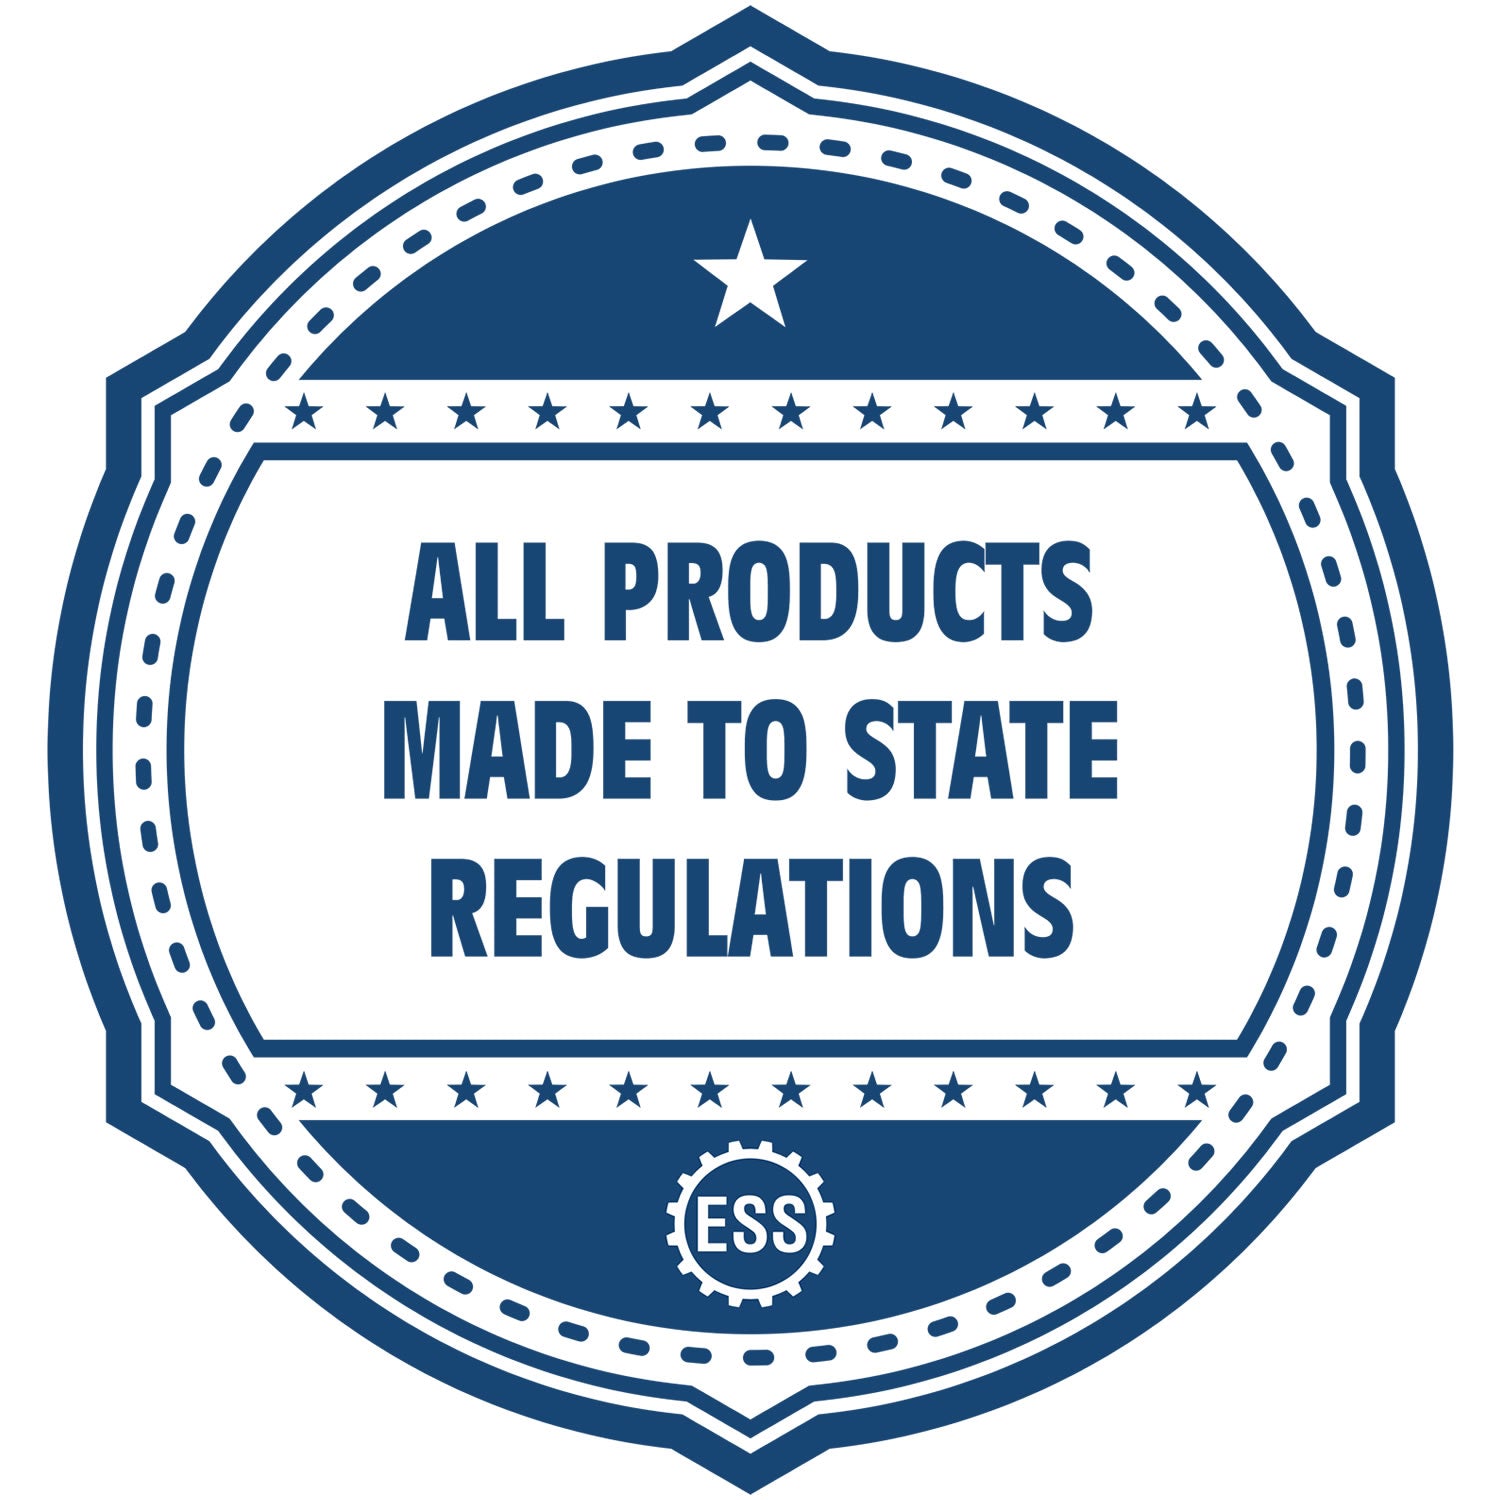 An icon or badge element for the Long Reach Wisconsin PE Seal showing that this product is made in compliance with state regulations.